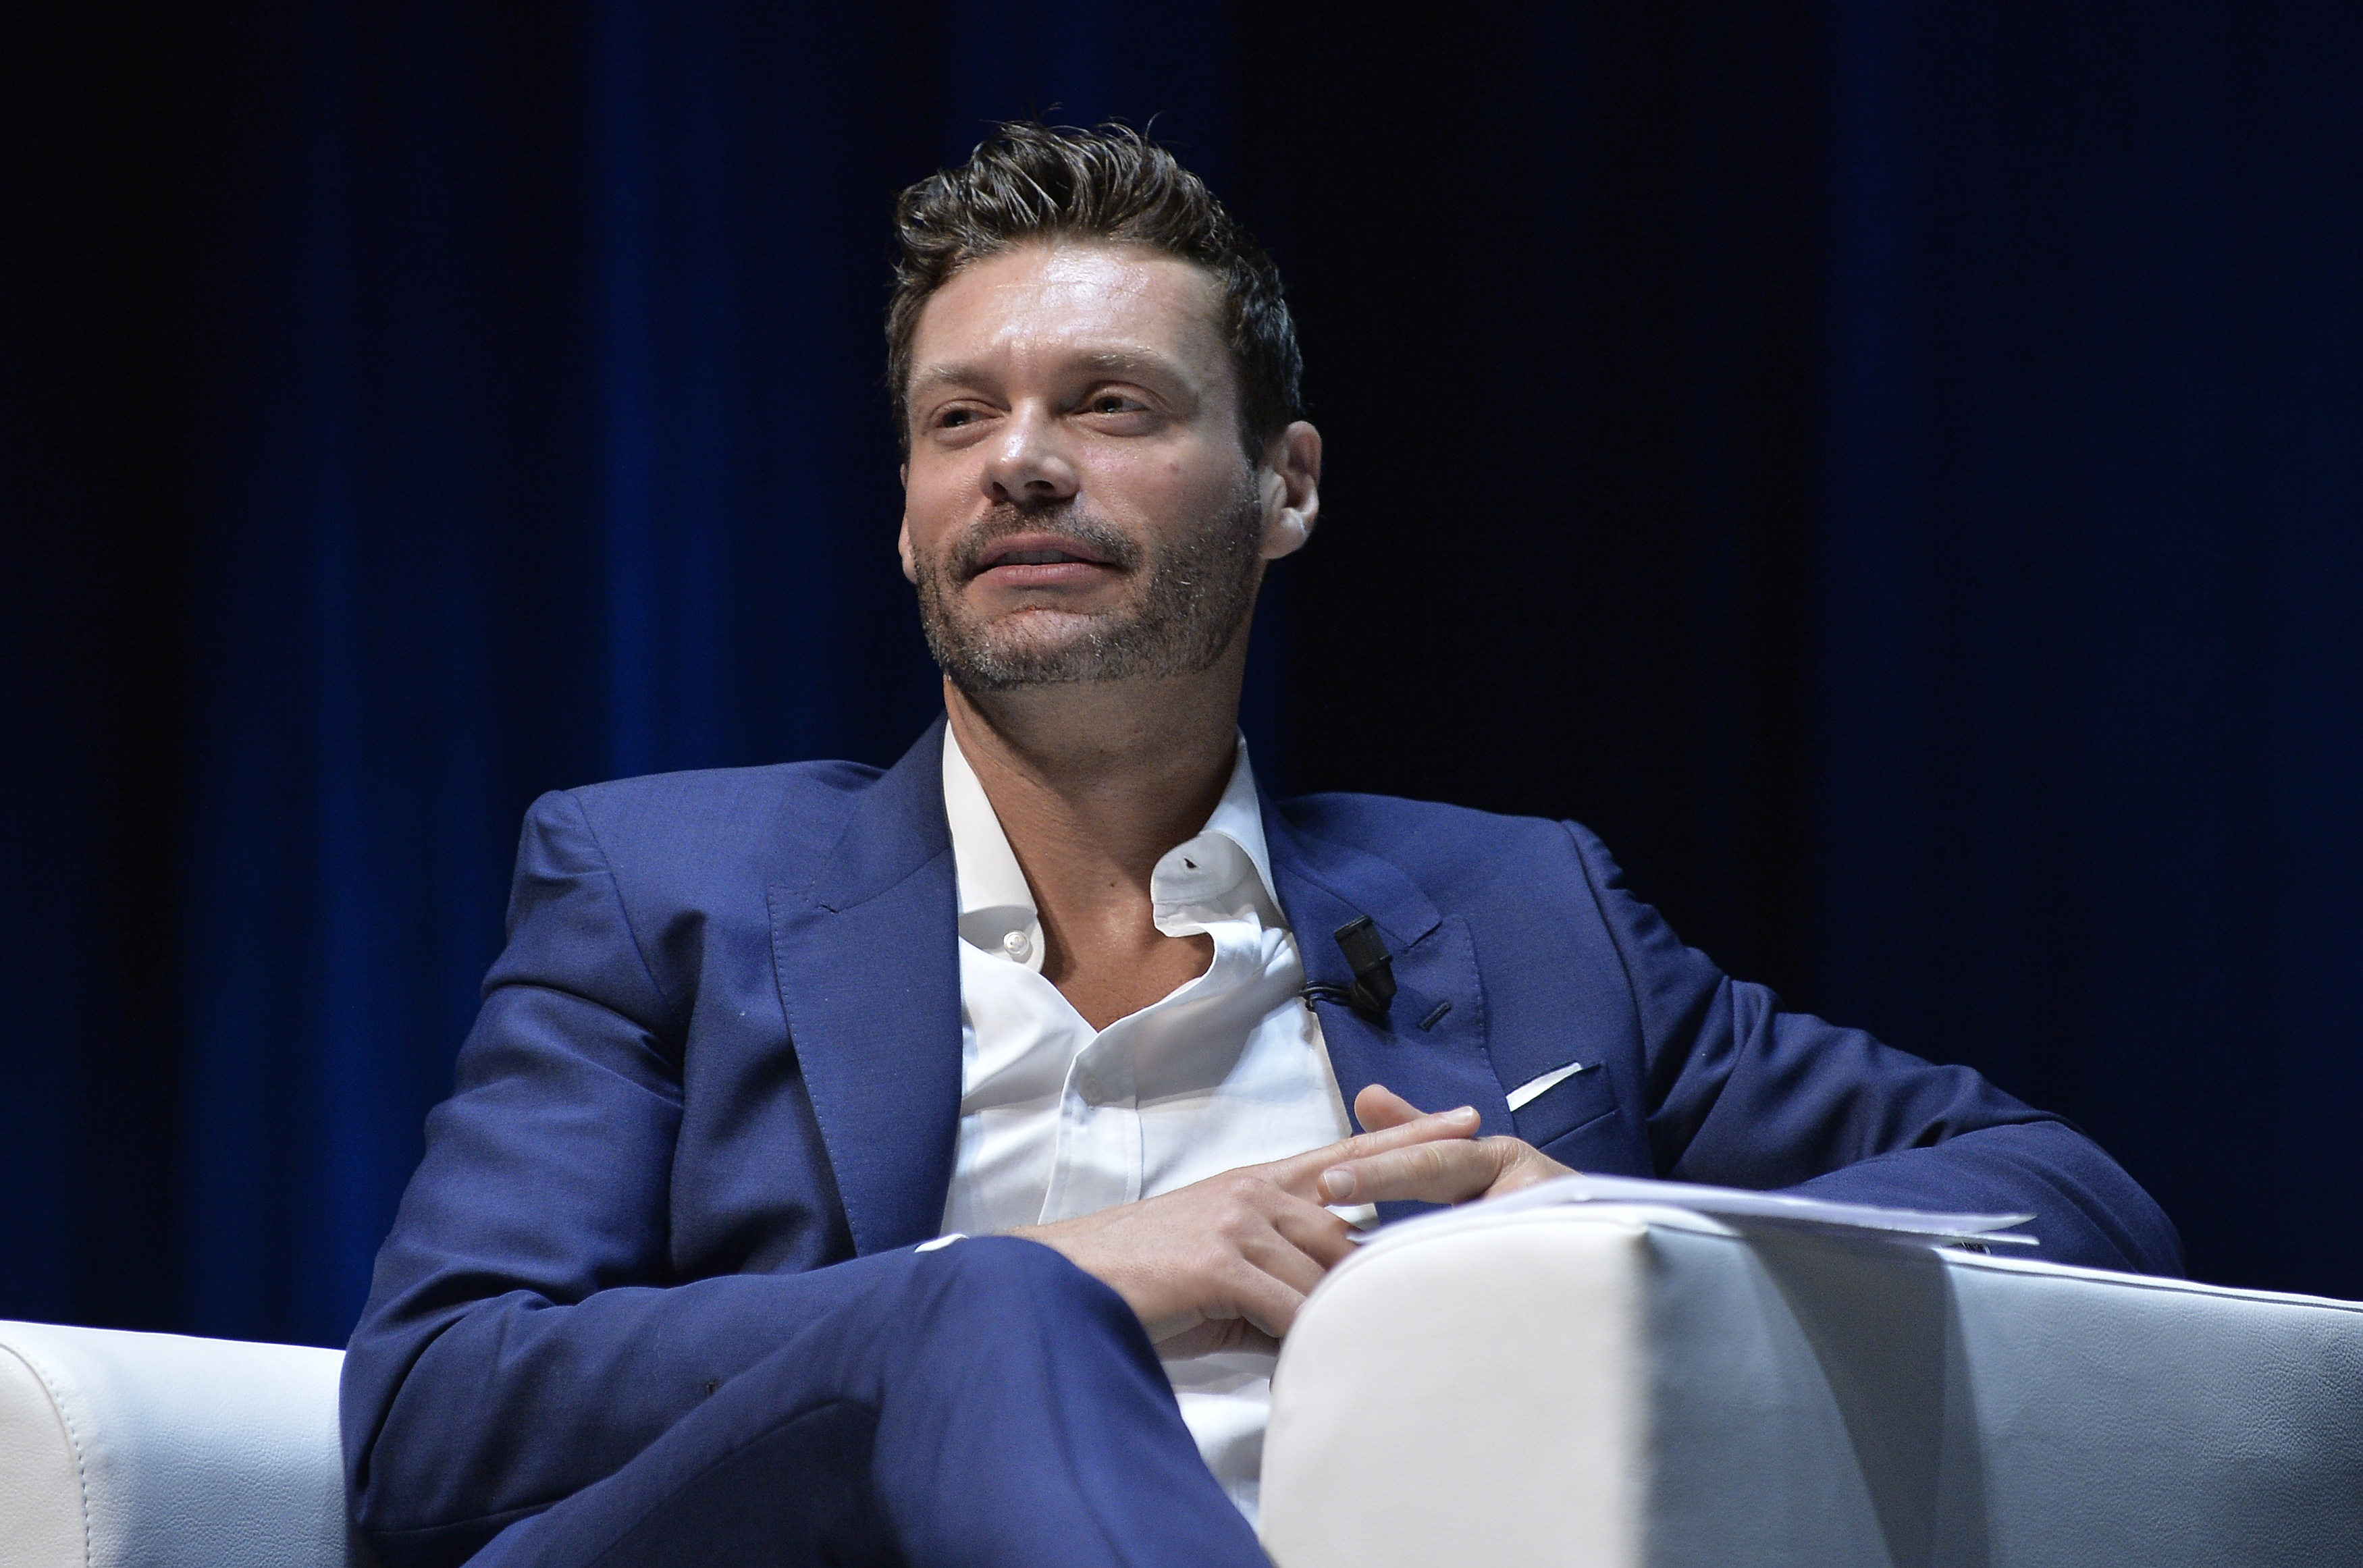 Ryan Seacrest was seemingly decades younger in the Summer-themed snap